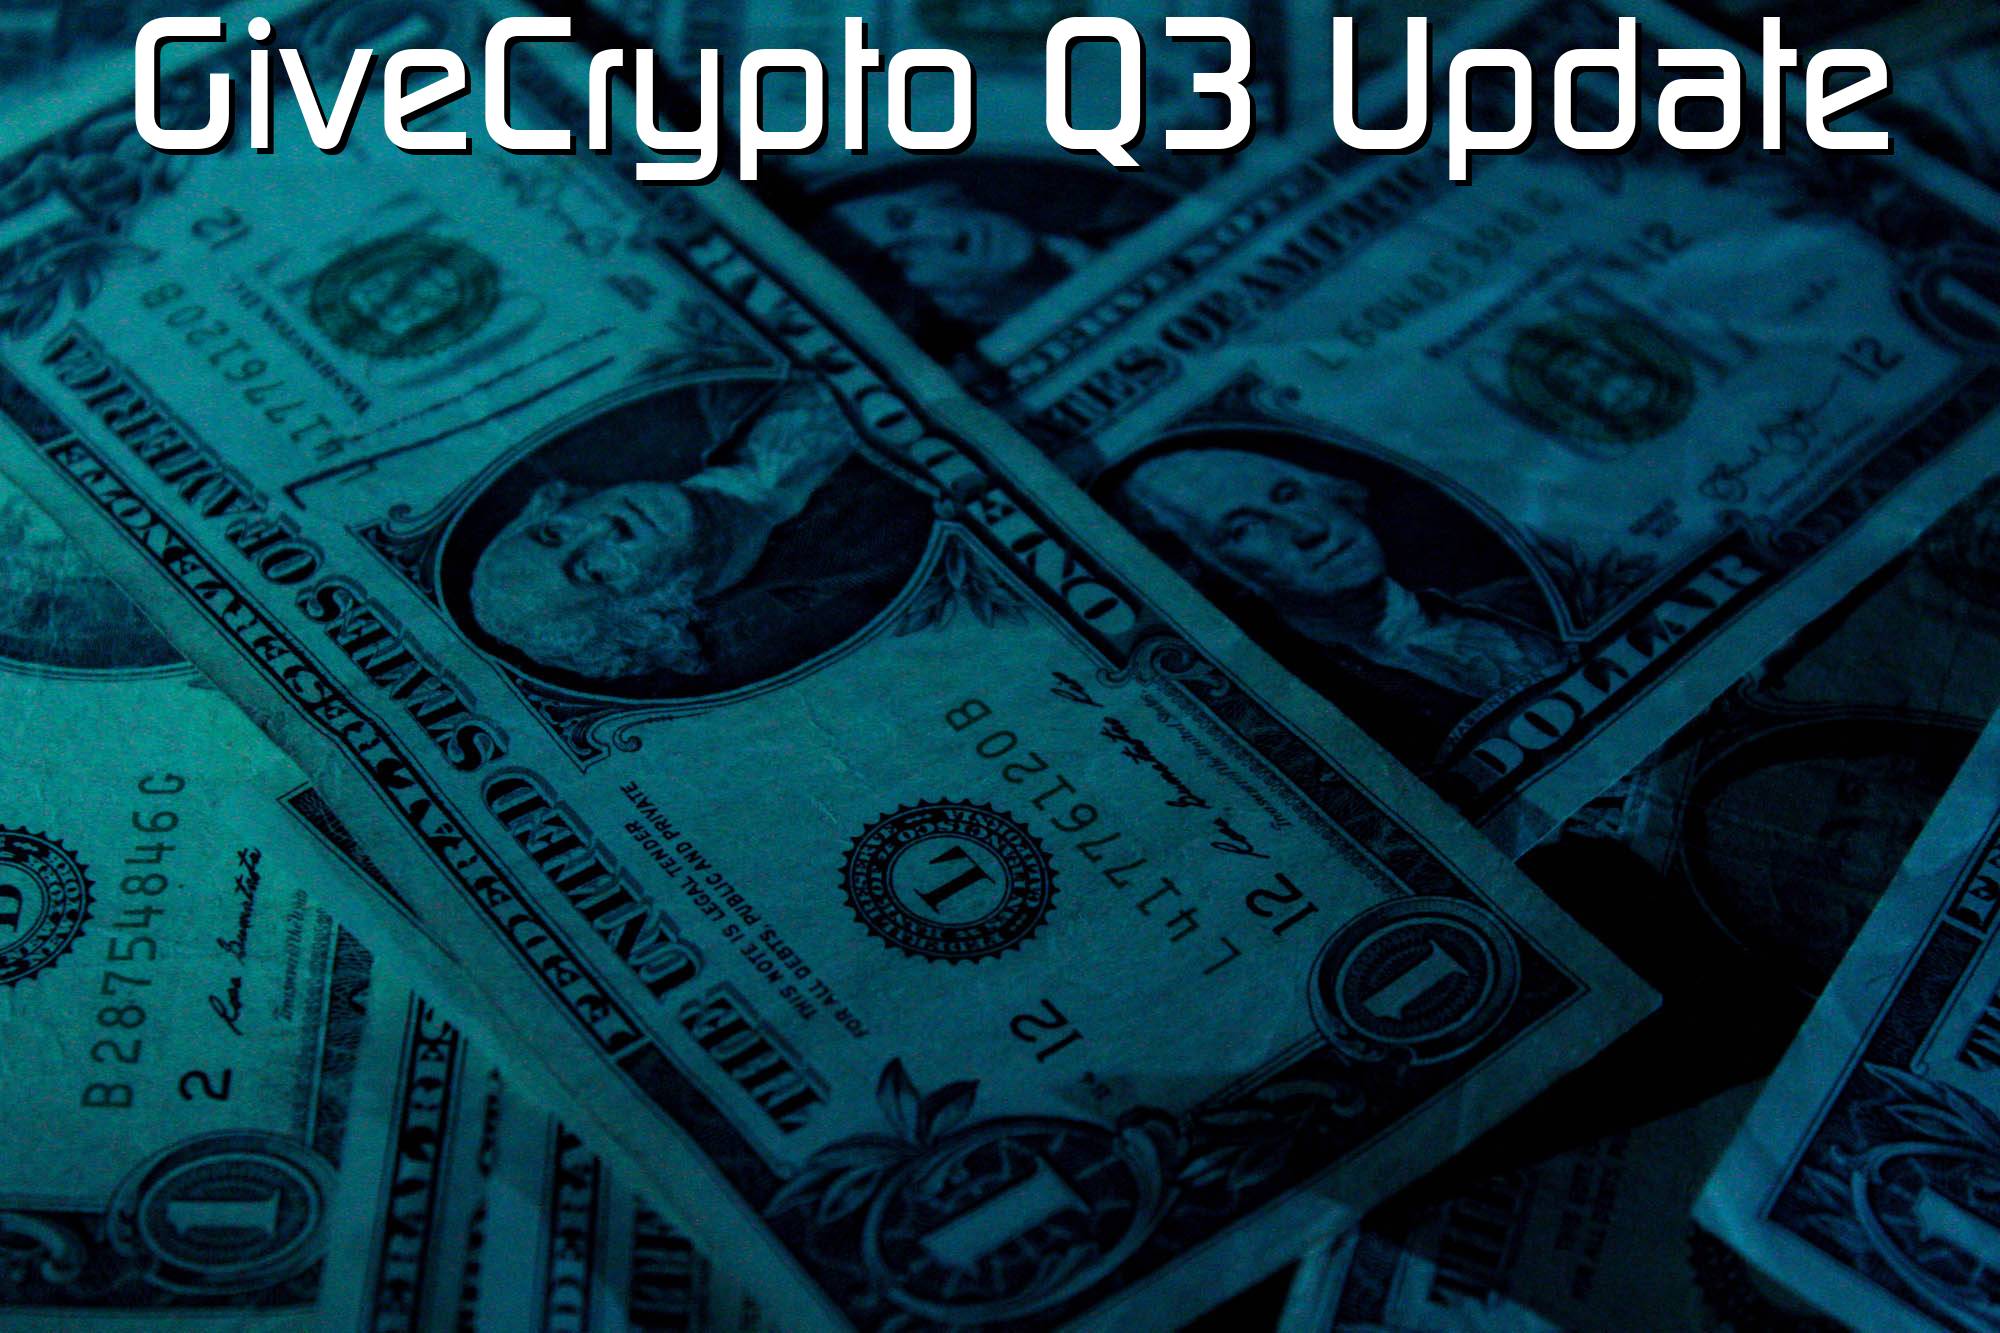 @$61167.15 GiveCrypto Q3 Update